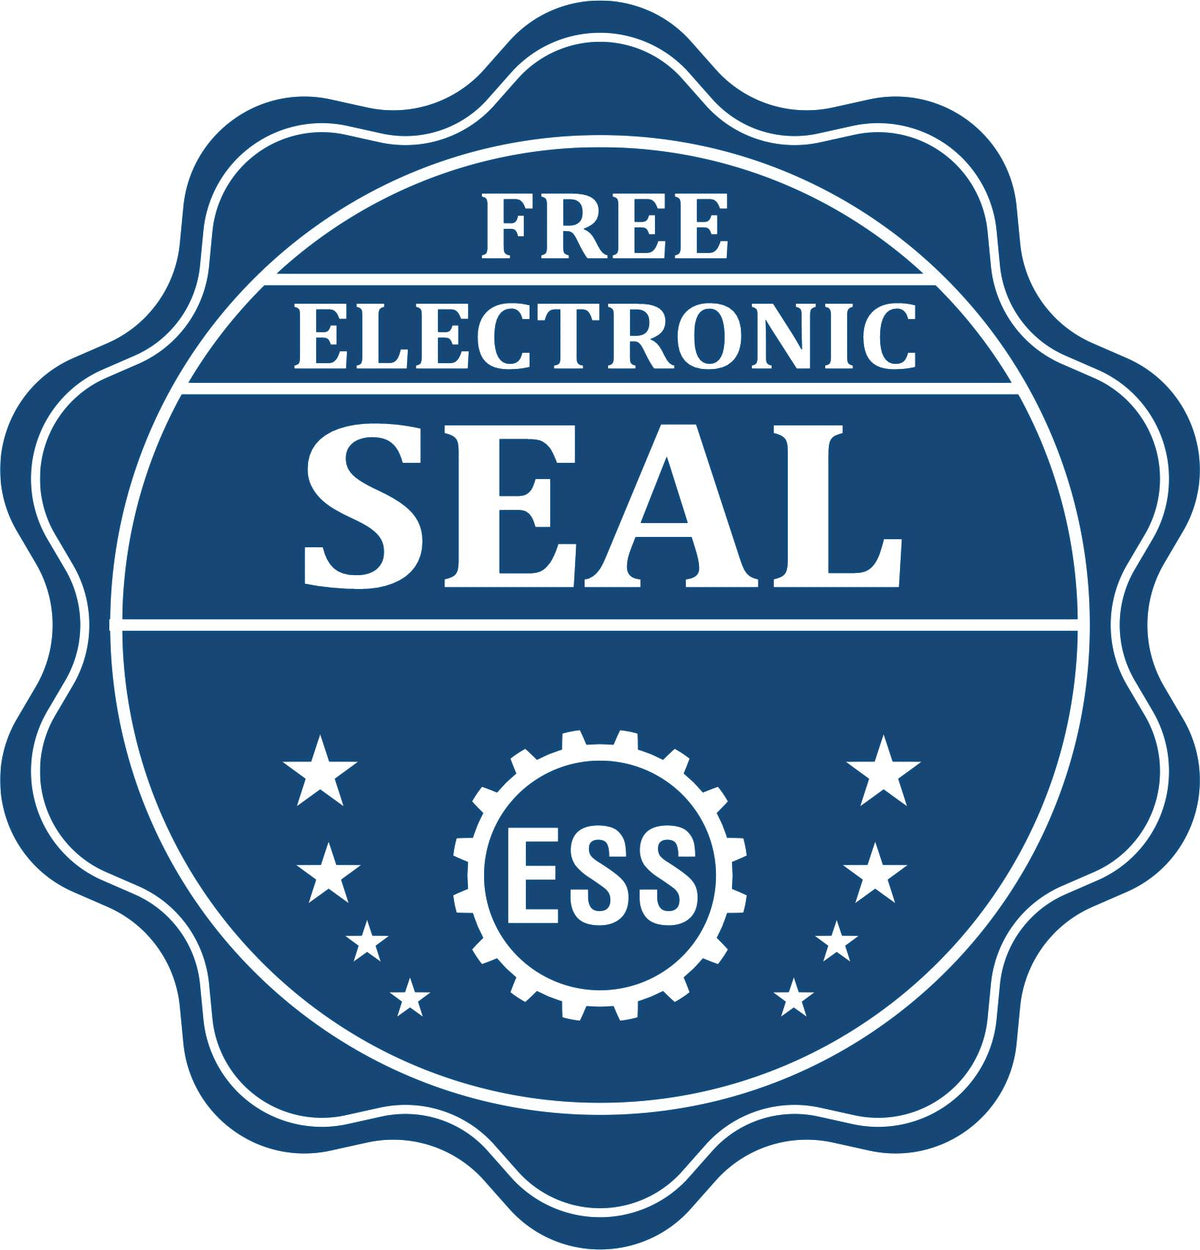 A badge showing a free electronic seal for the Hybrid Tennessee Geologist Seal with stars and the ESS gear on the emblem.